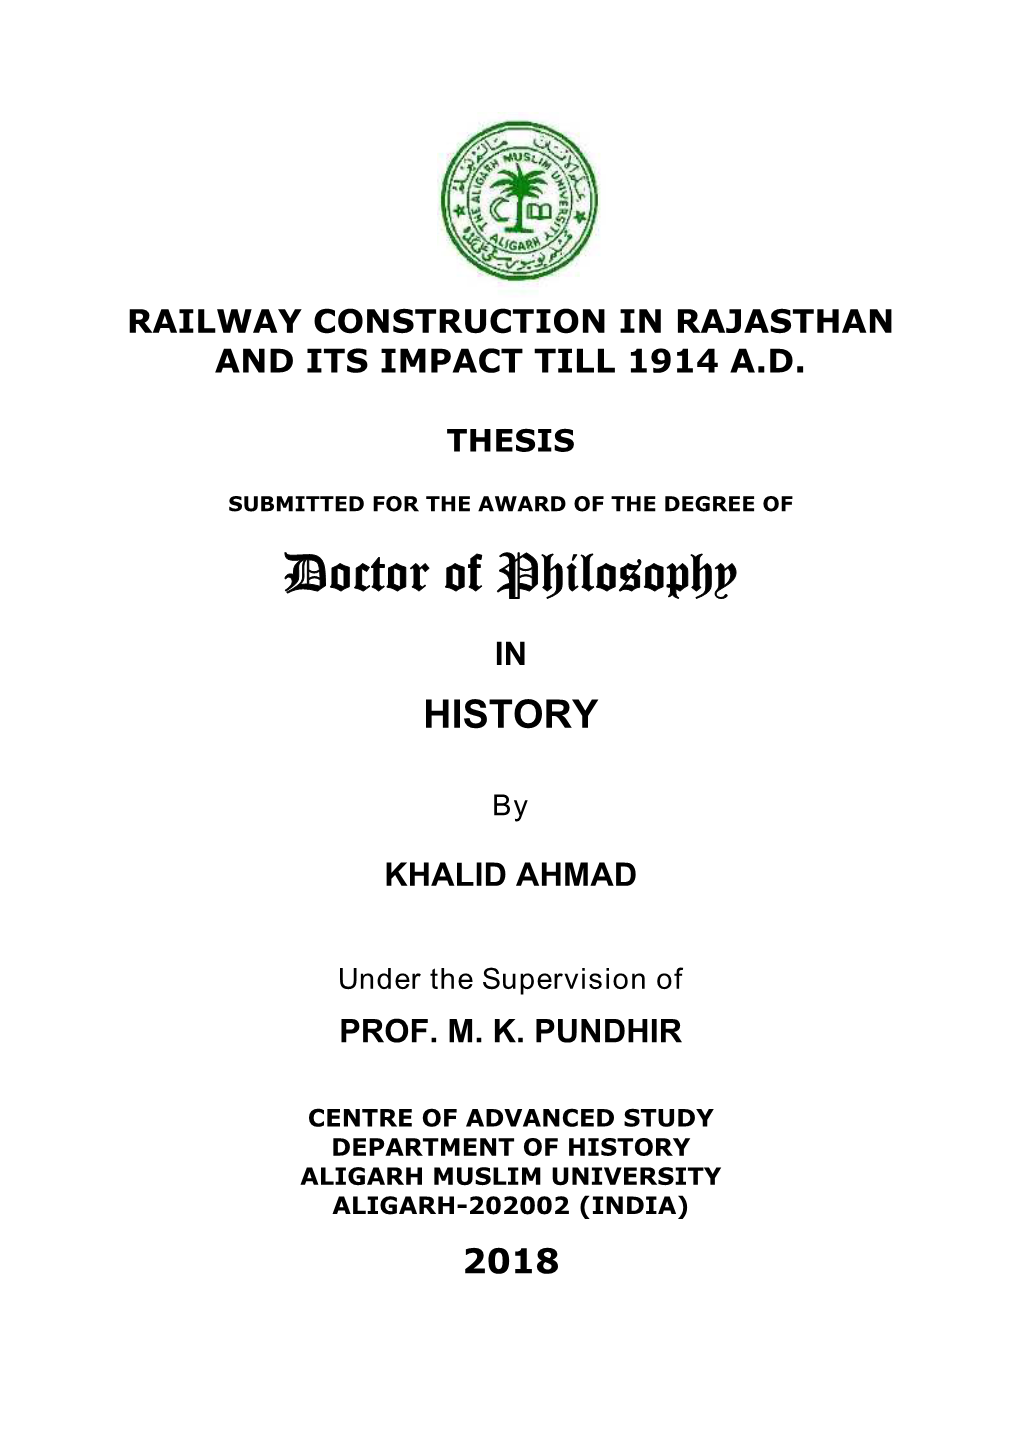 Railway Construction in Rajasthan and Its Impact Till 1914 A.D